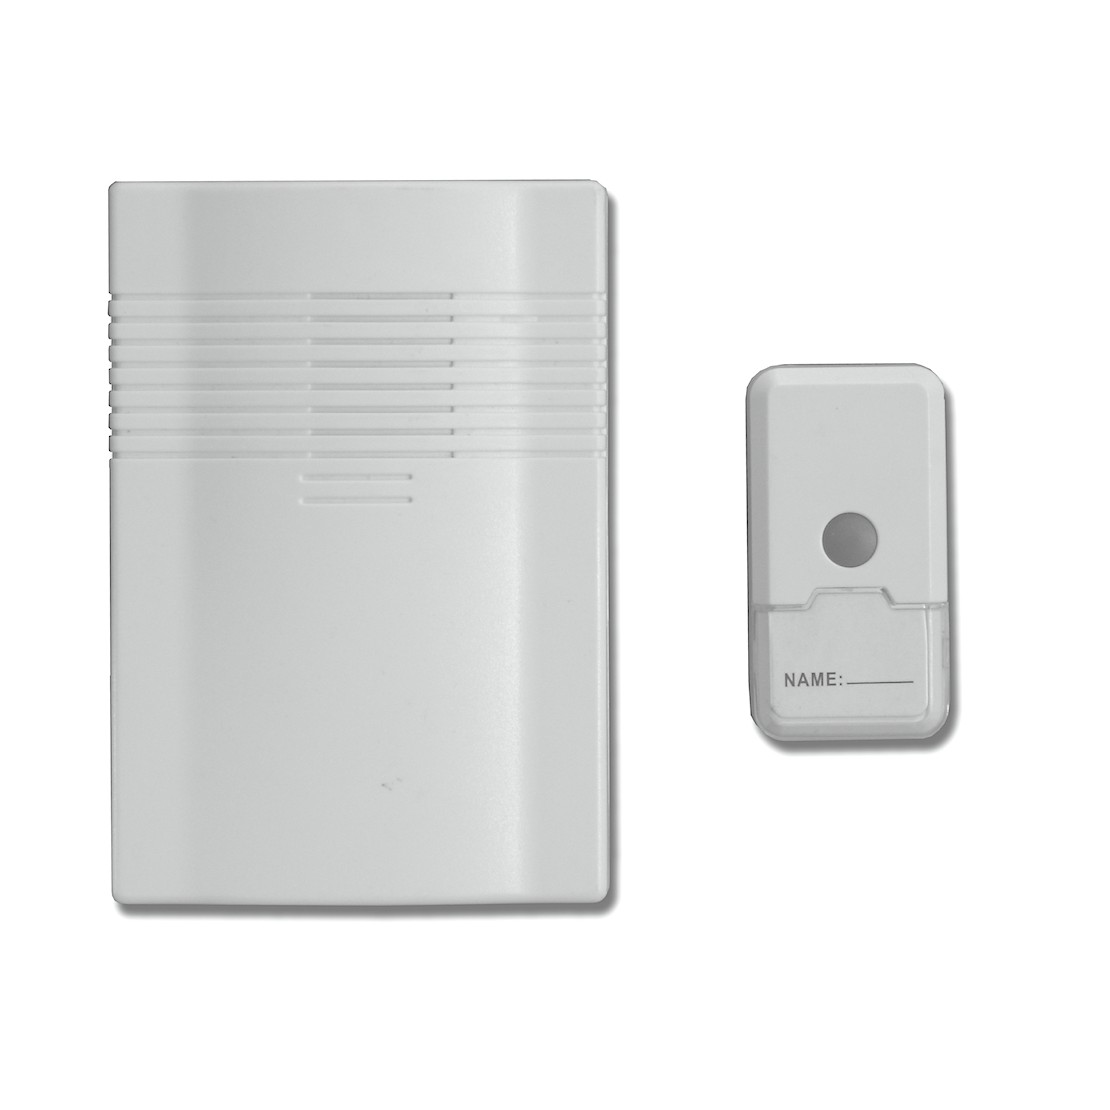 https://chacon.com/12337-large_default/wireless-chime-push-button-white.jpg